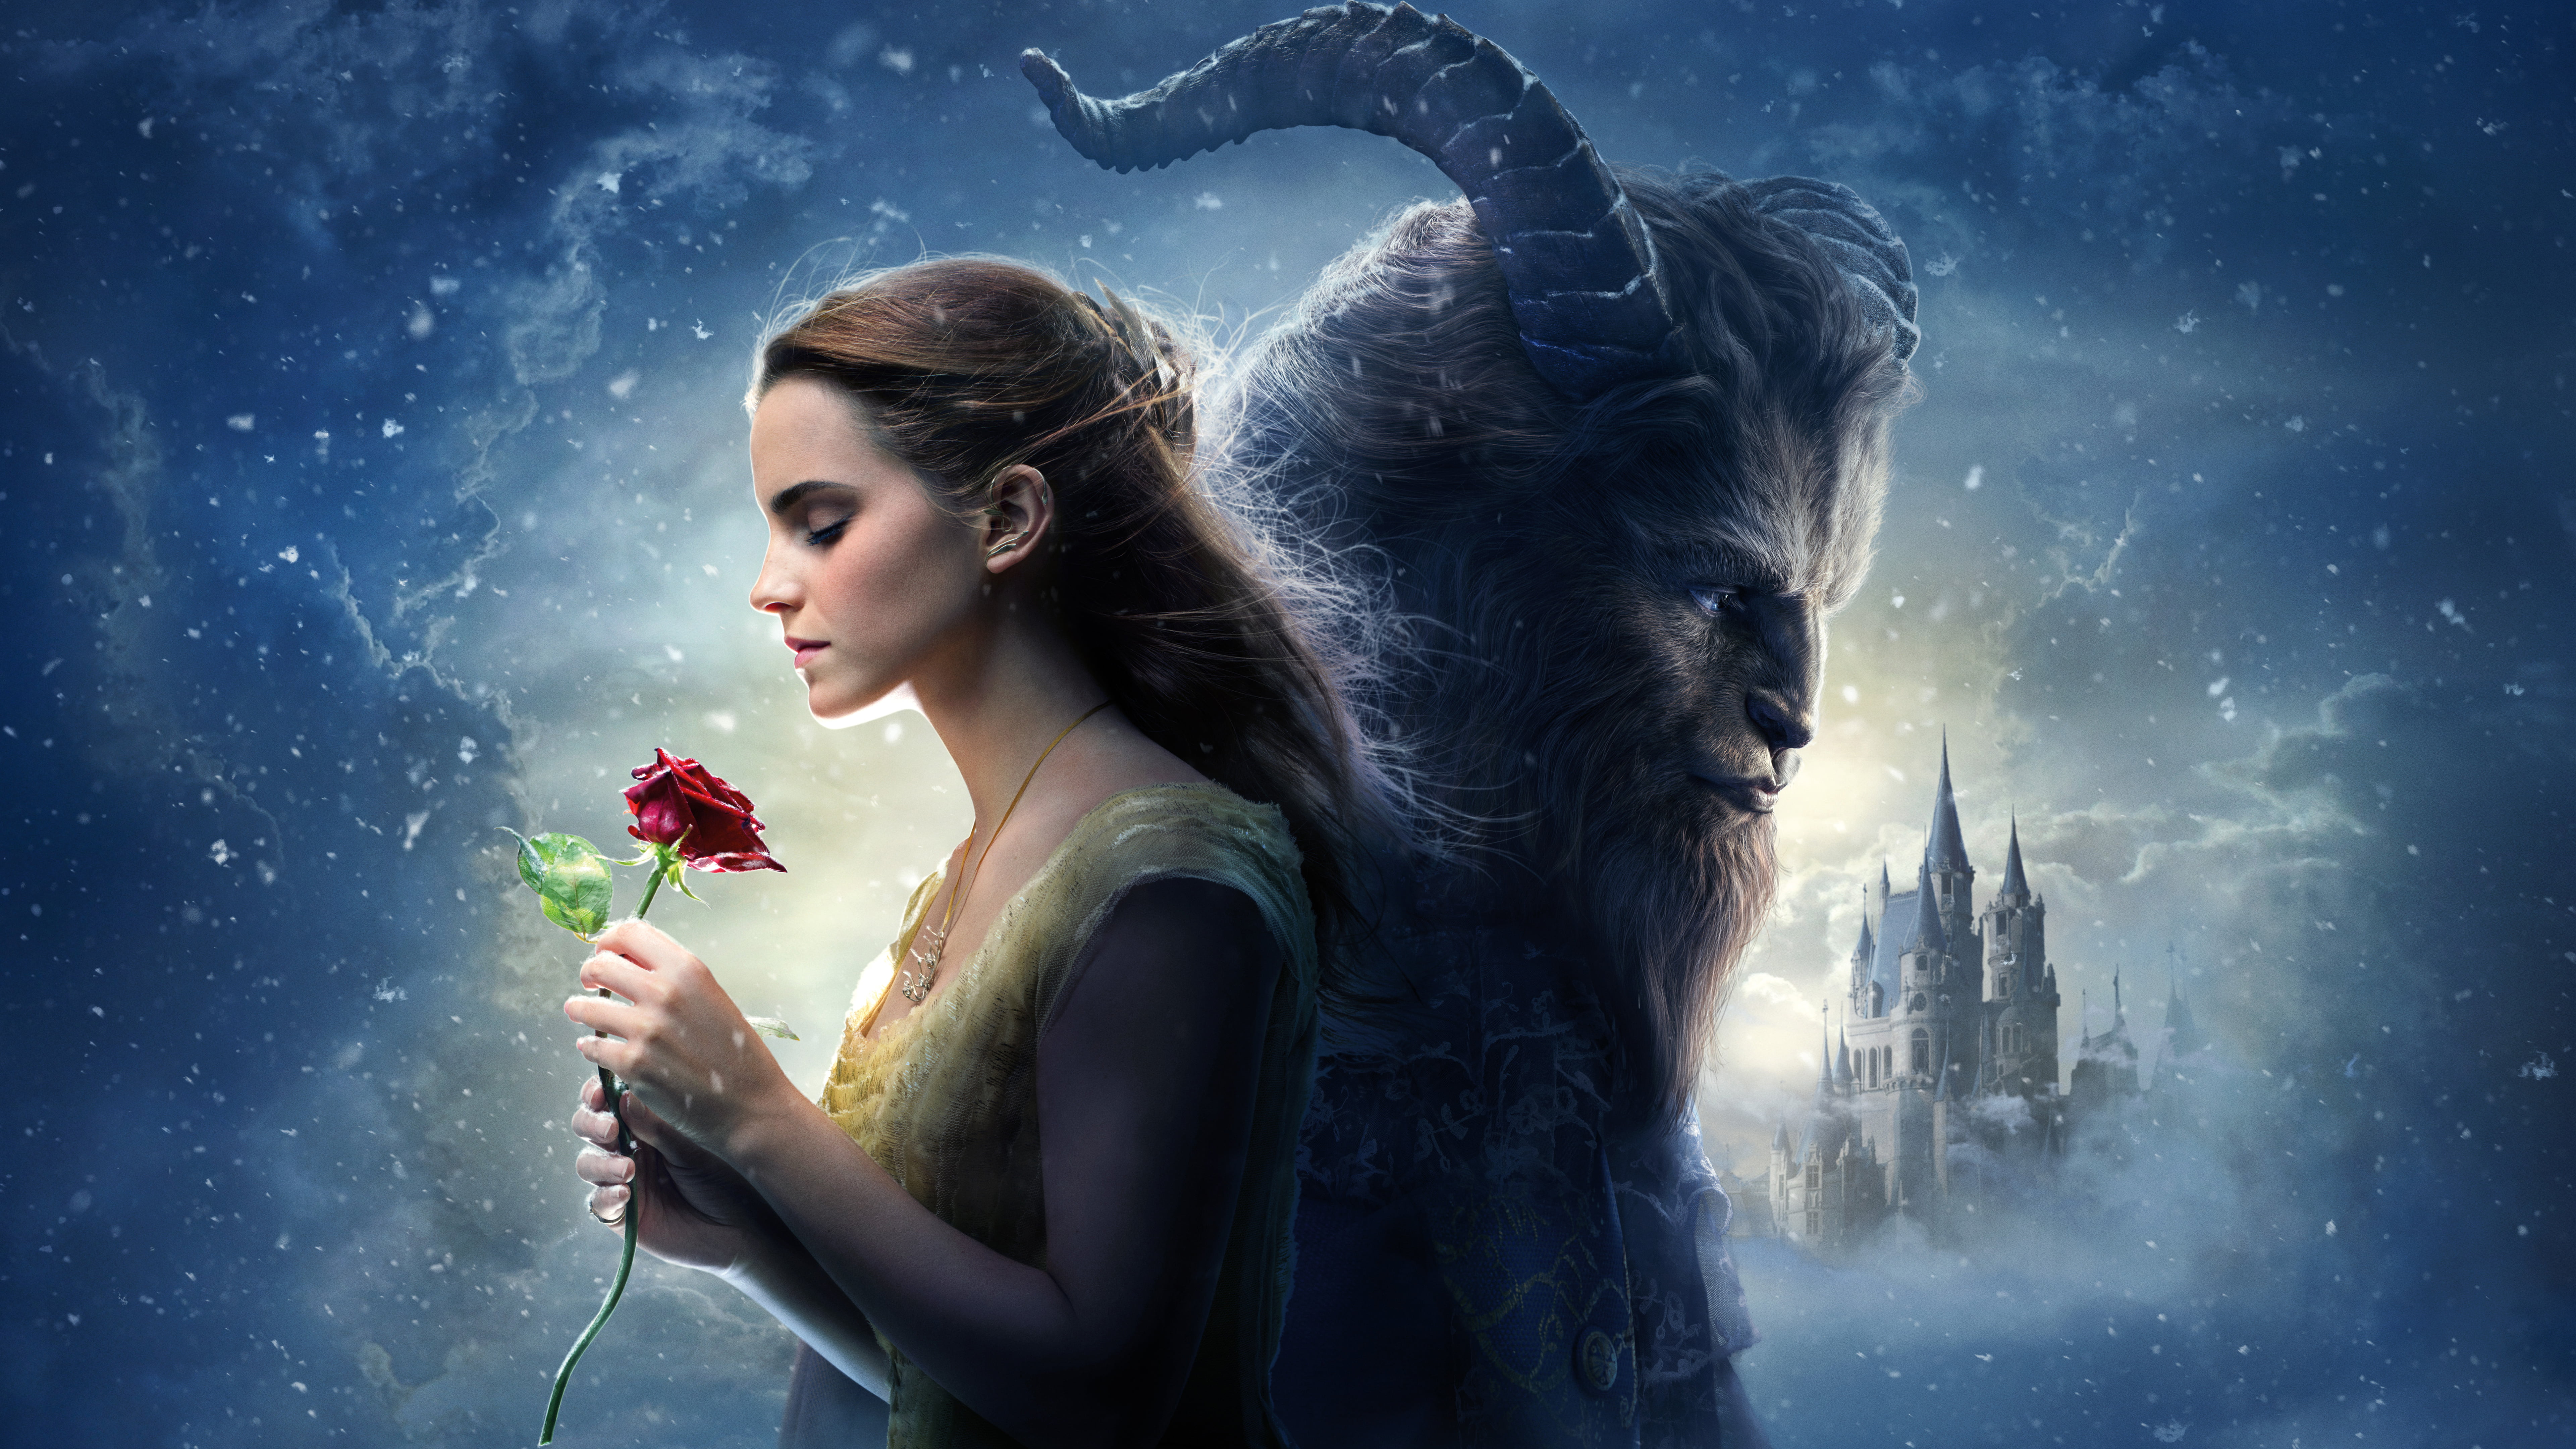 Beauty And The Beast Wallpaper HD